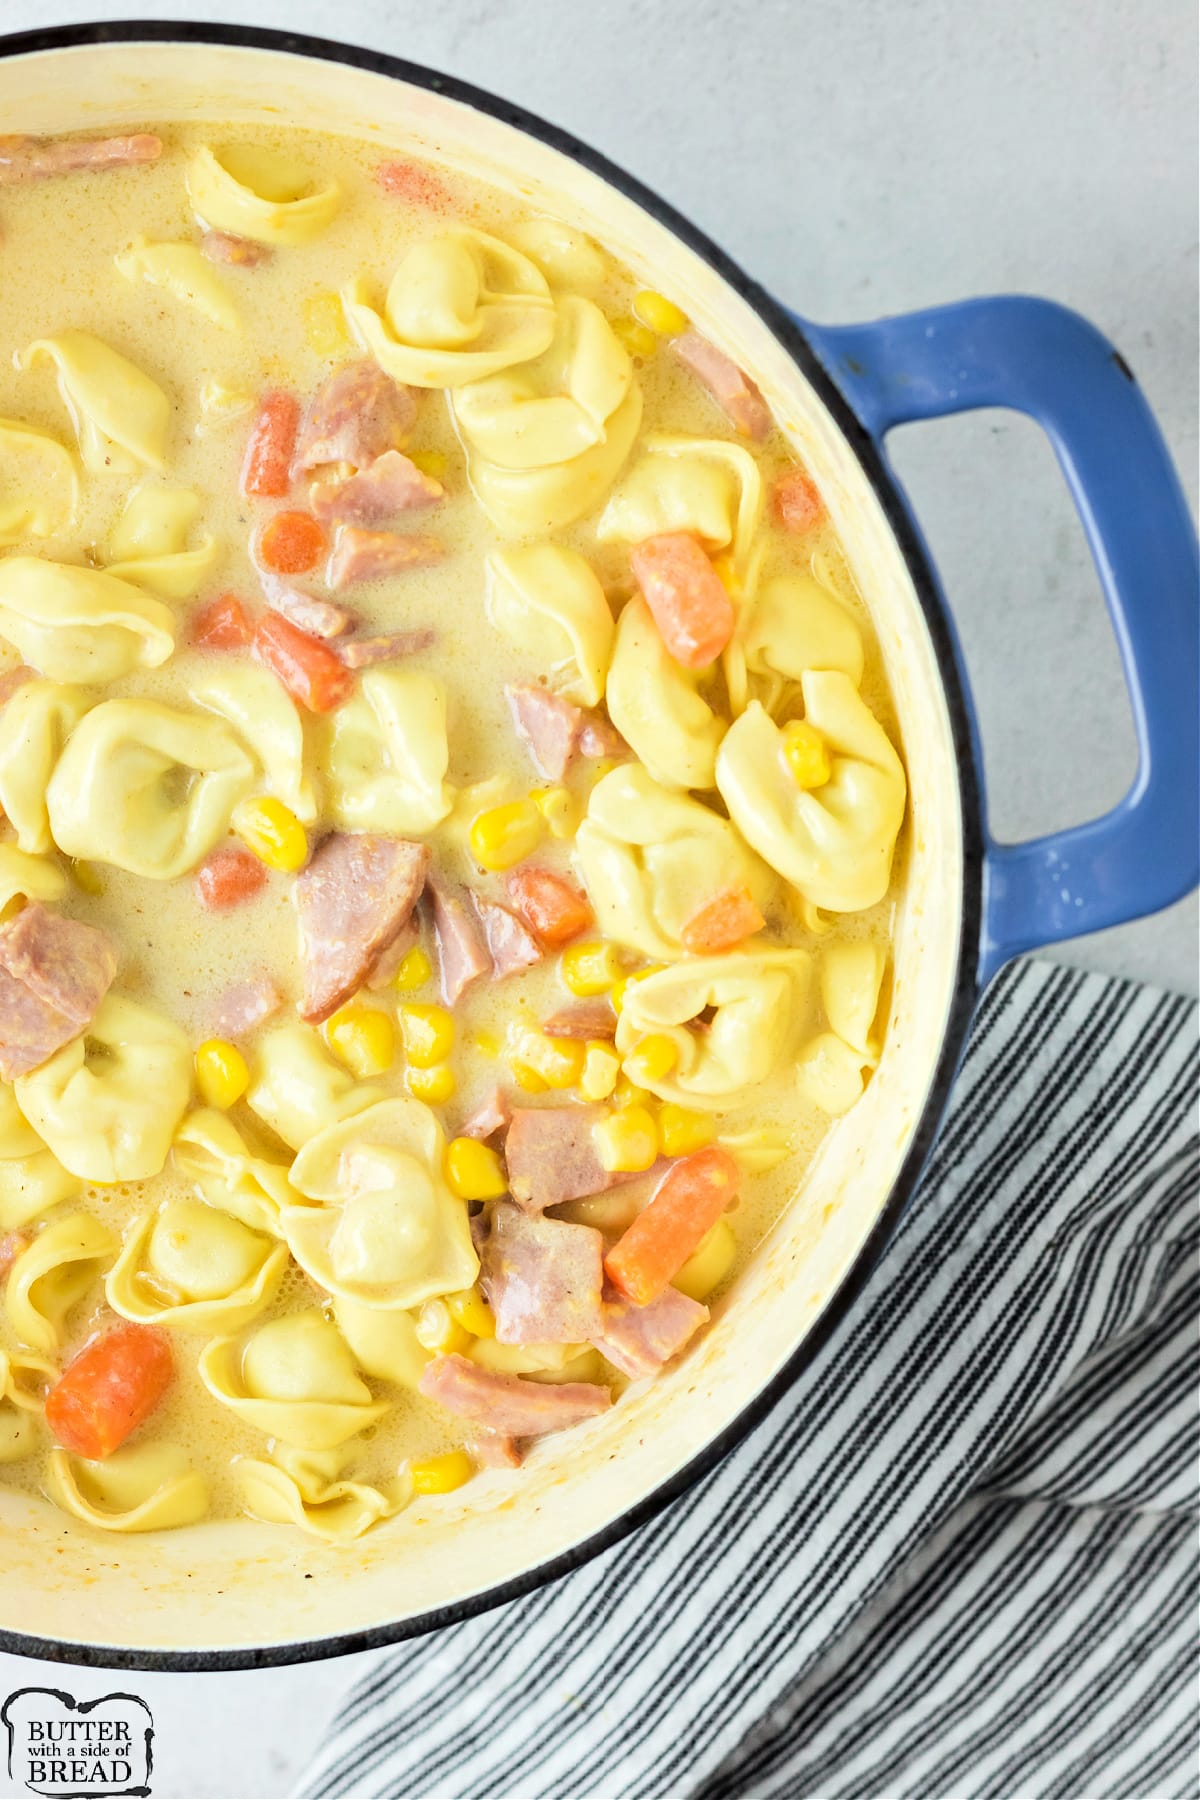 Soup with tortellini, cheese, ham and veggies